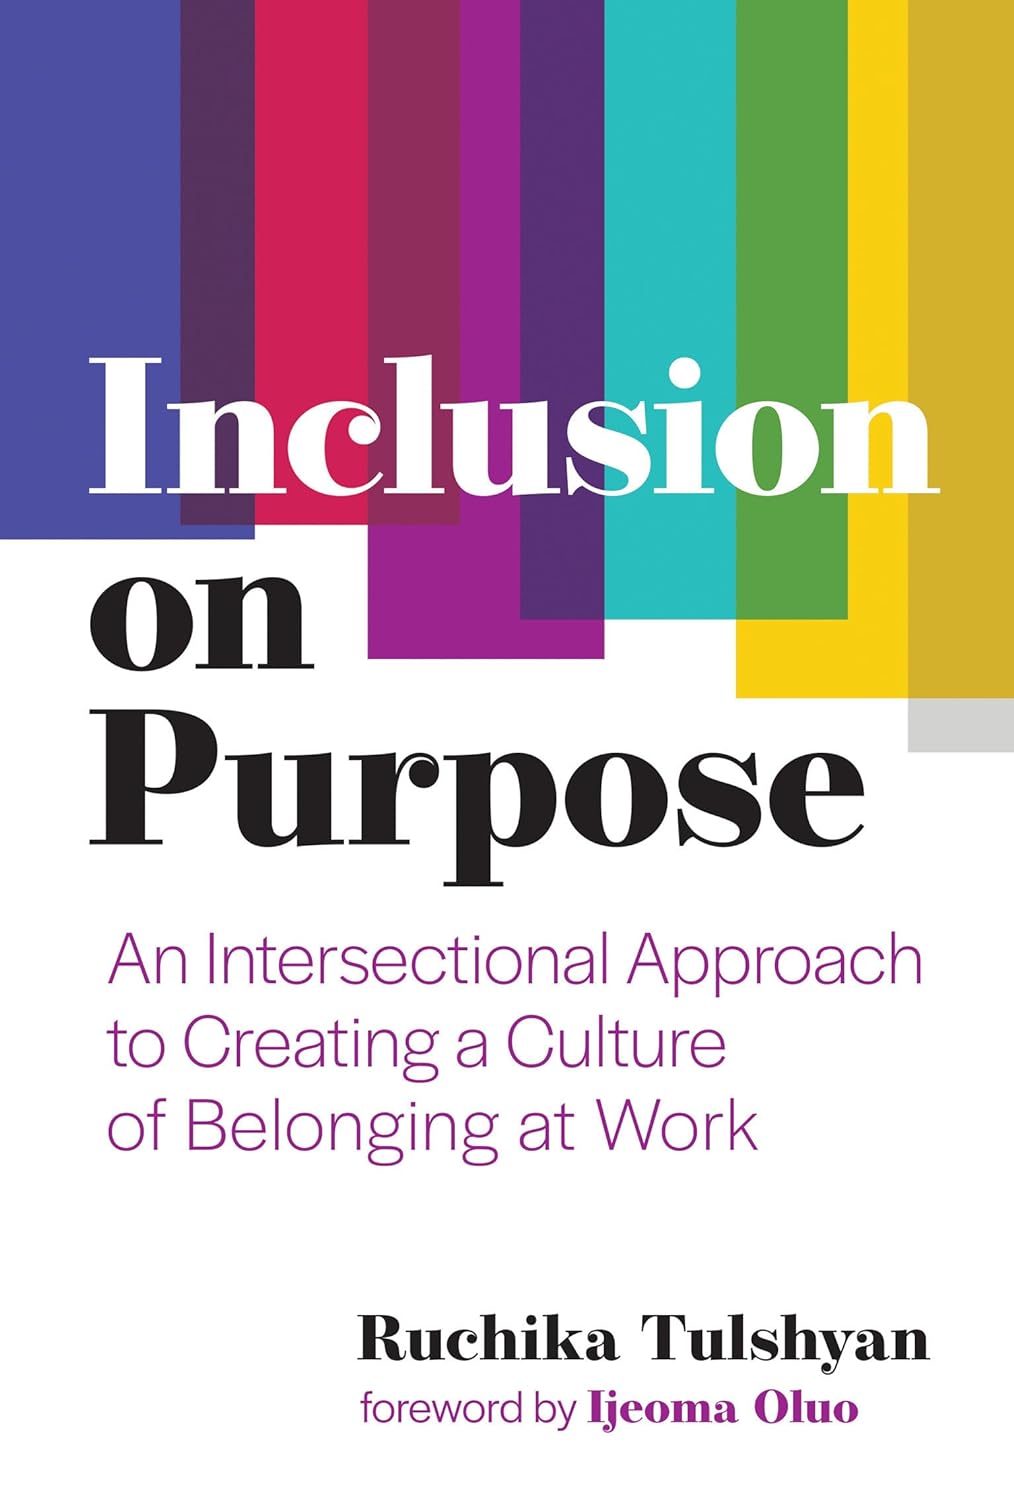 Inclusion on Purpose  Paperback by Ruchika Tulshyan (Author), Ijeoma Oluo (Foreword)